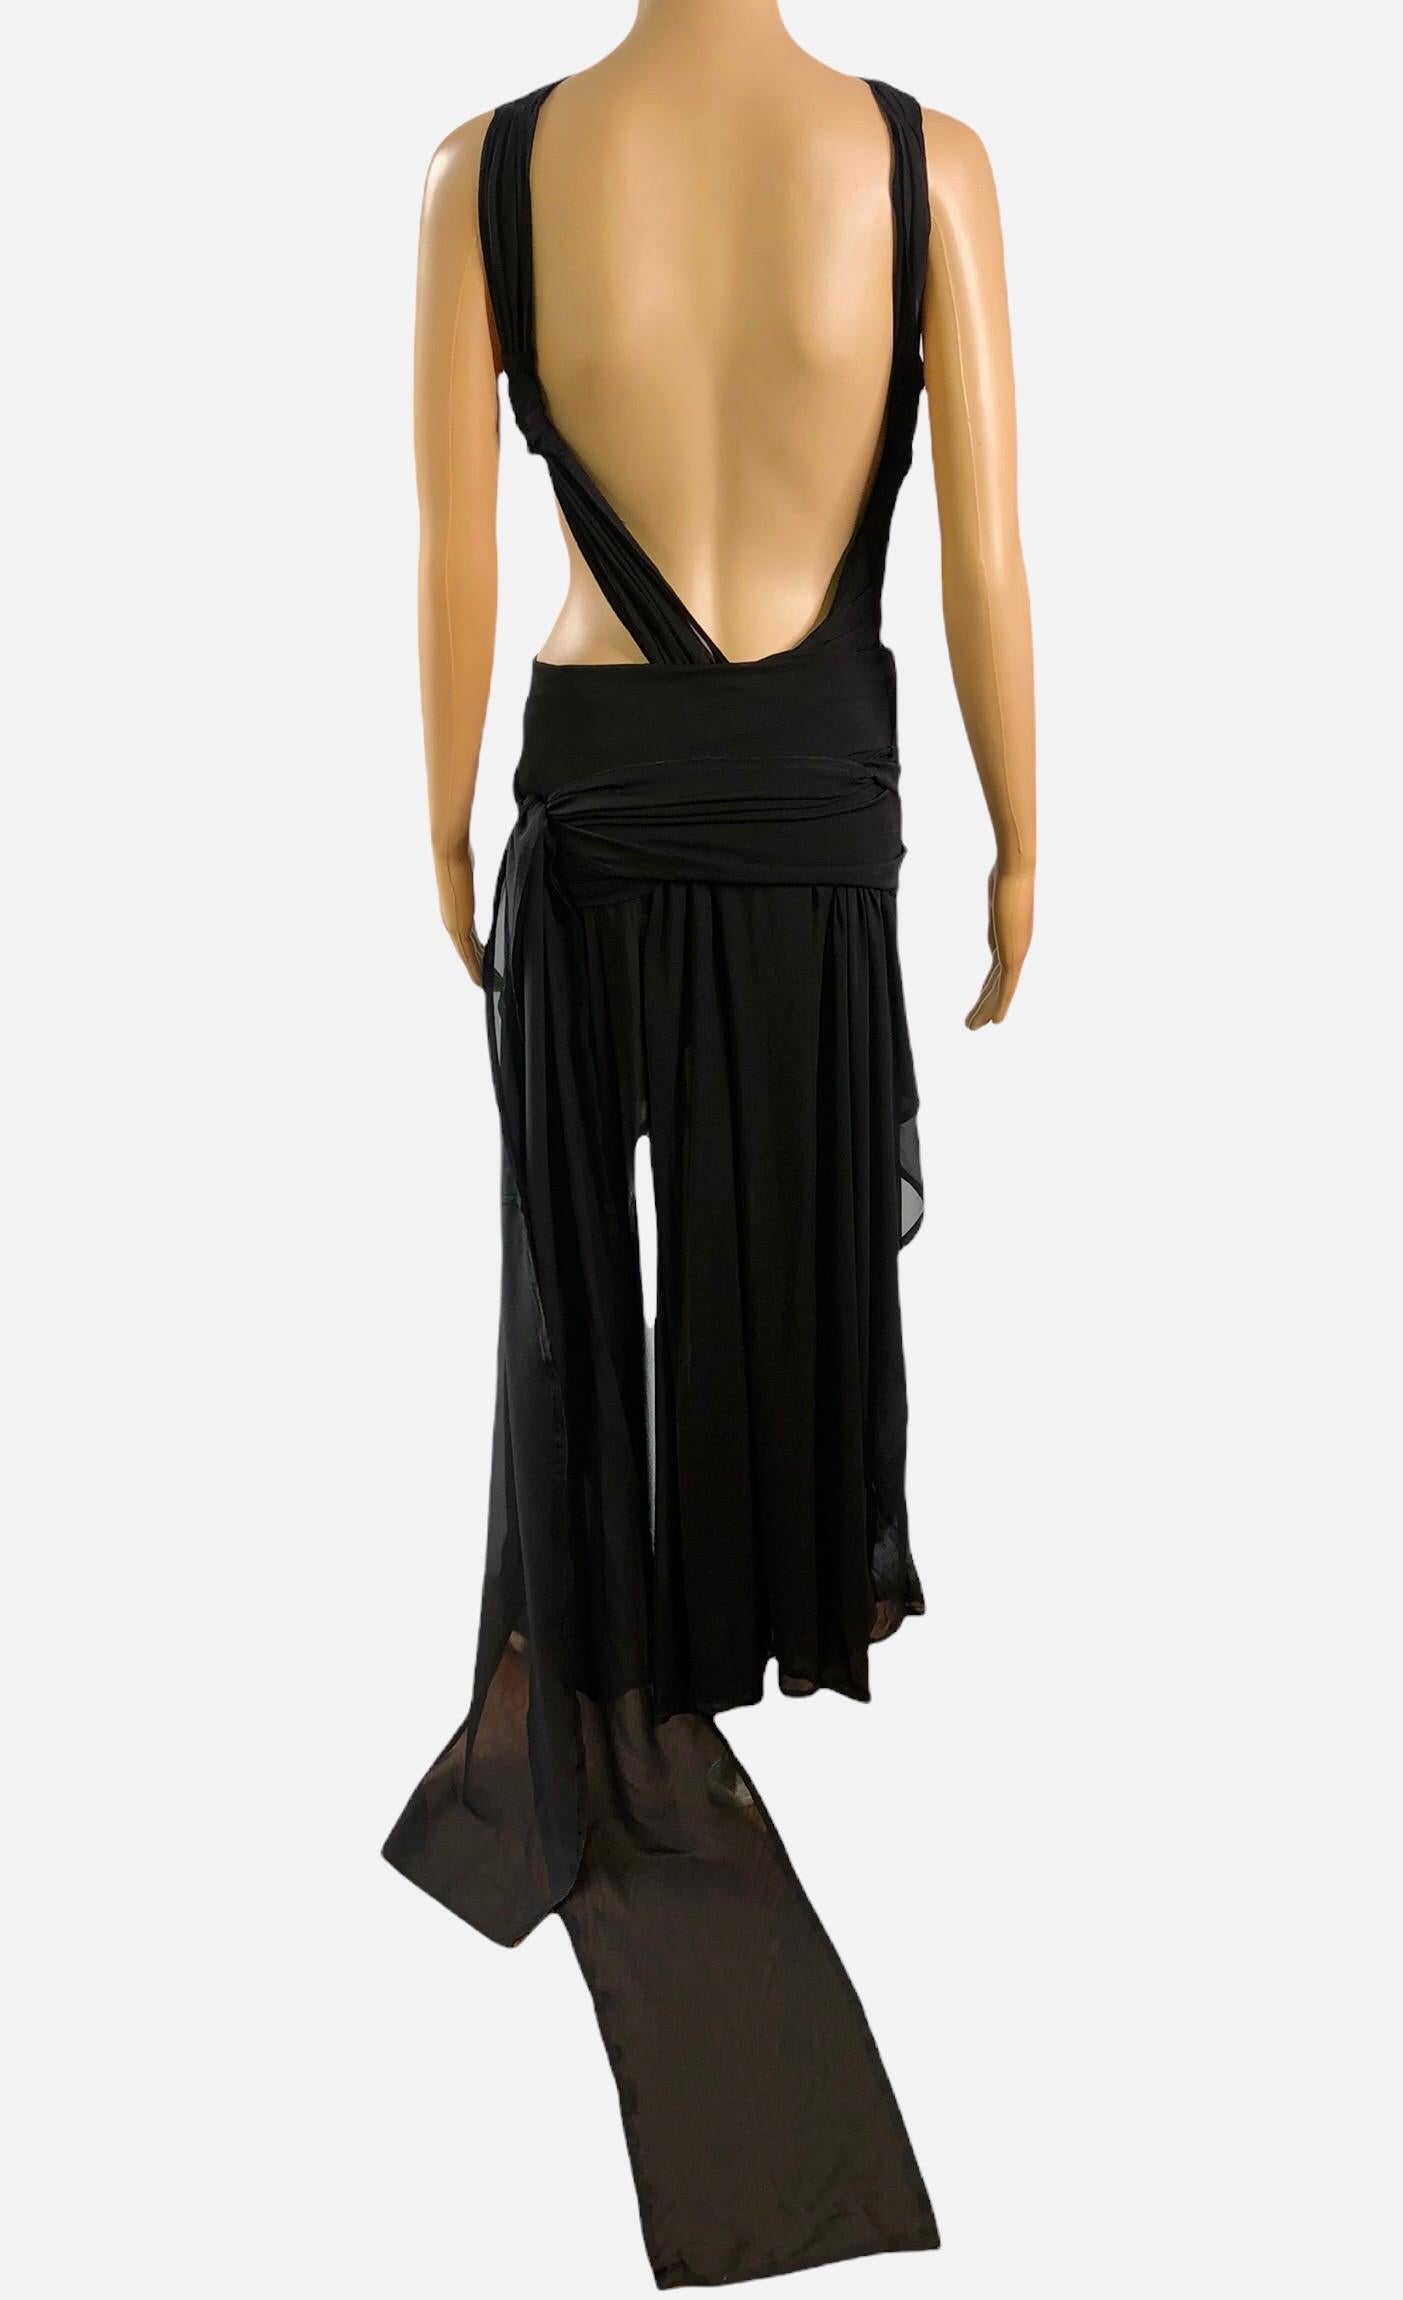 Tom Ford for Yves Saint Laurent S/S 2002 Runway Sheer Cutout Black Dress Gown For Sale 1